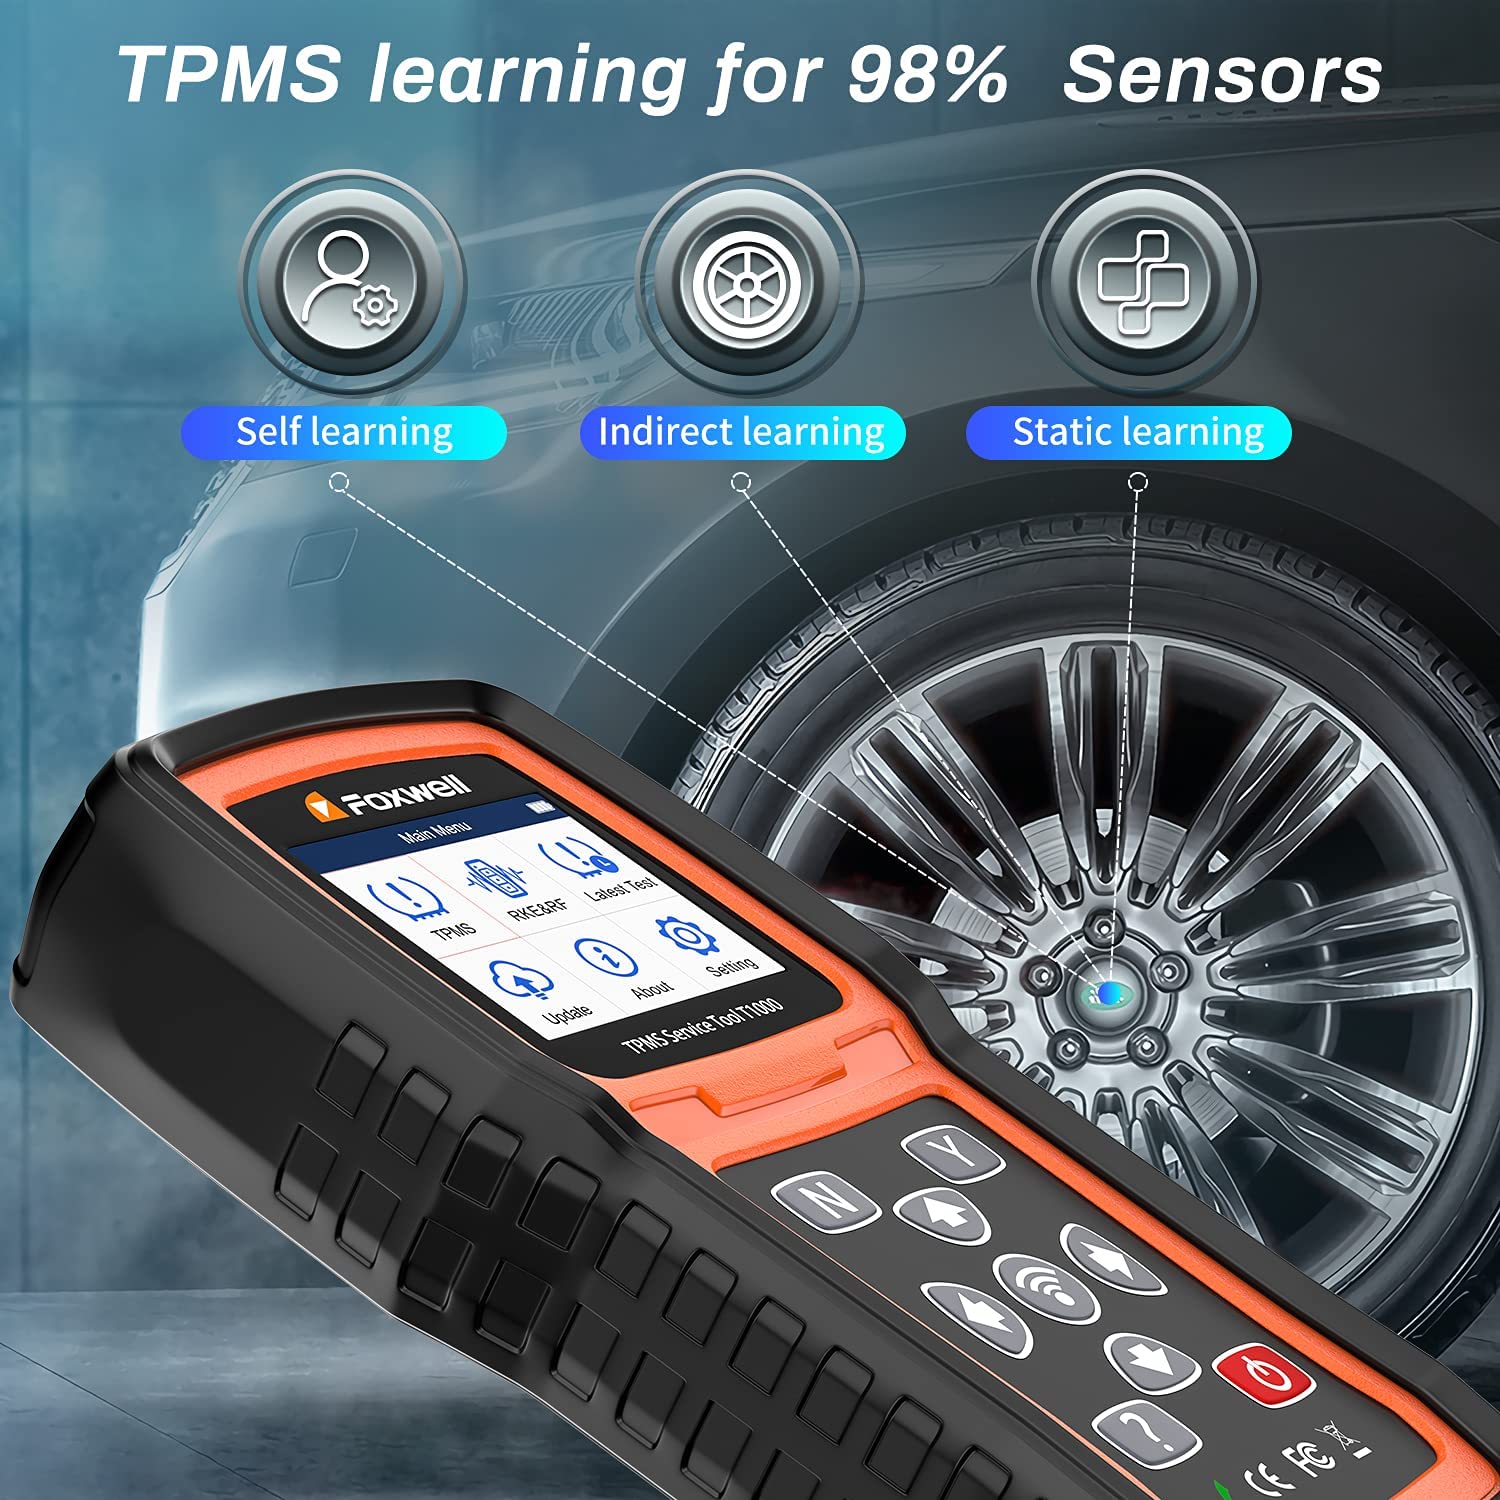 Foxwell T1000 TPMS Tool Programming Activate TPMS Sensors Check RF Key FOB Tire Pressure Monitoring System Auto Tester Detector